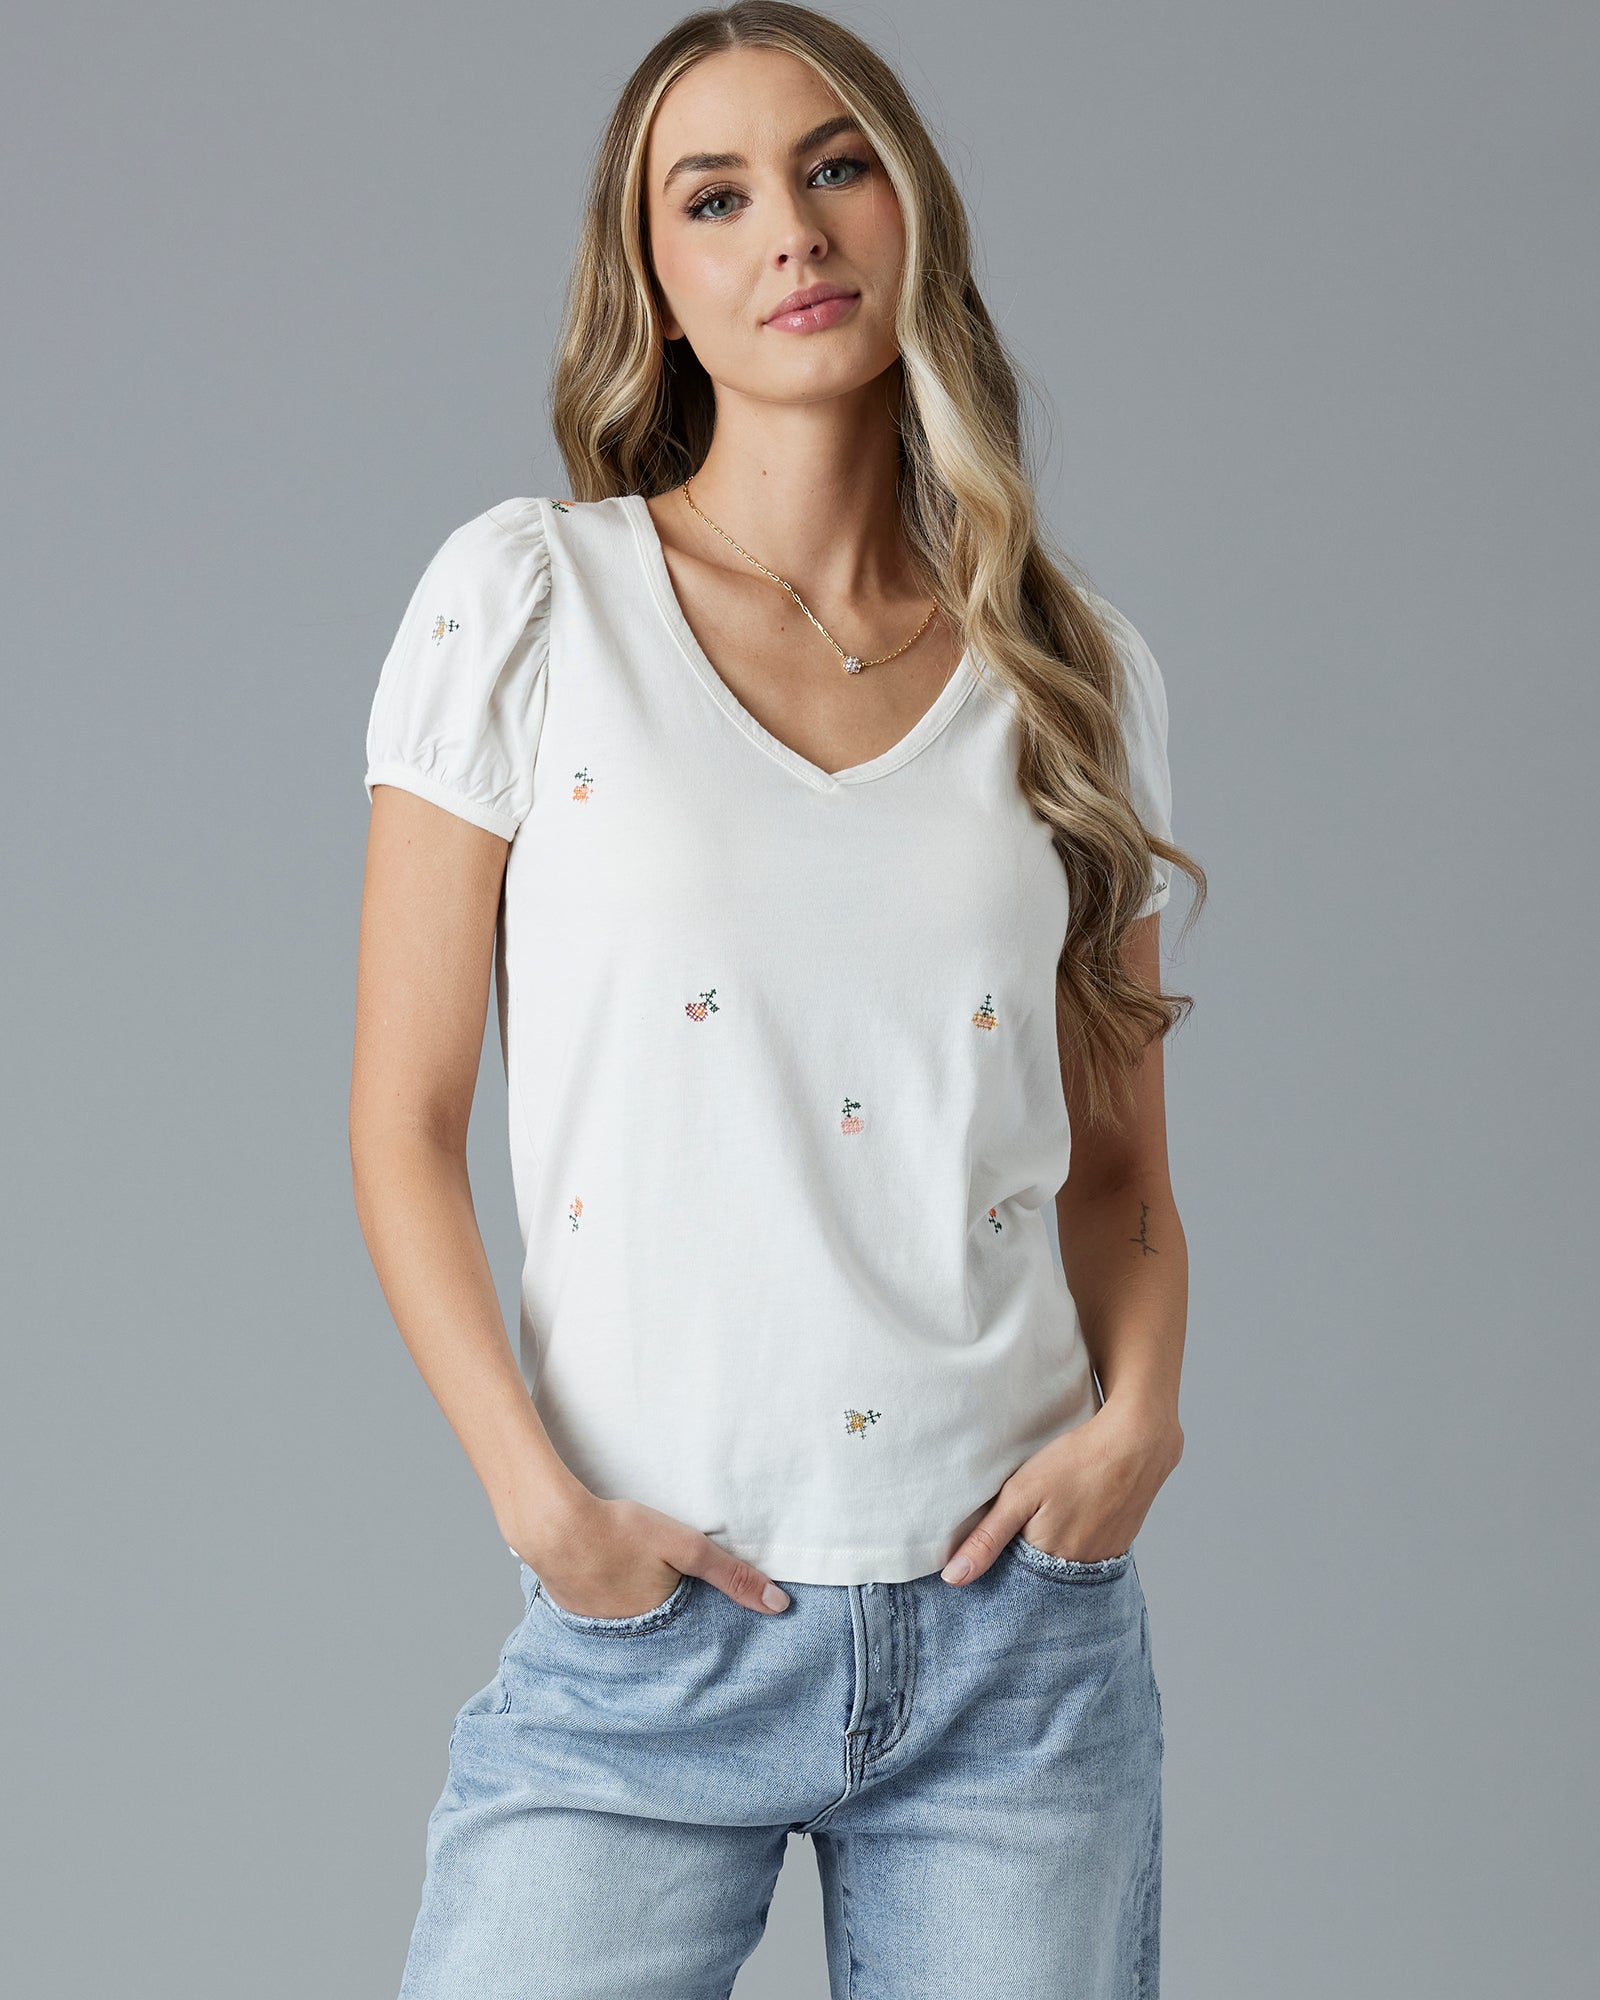 Woman in a white short sleeve t-shirt with floral embroidery